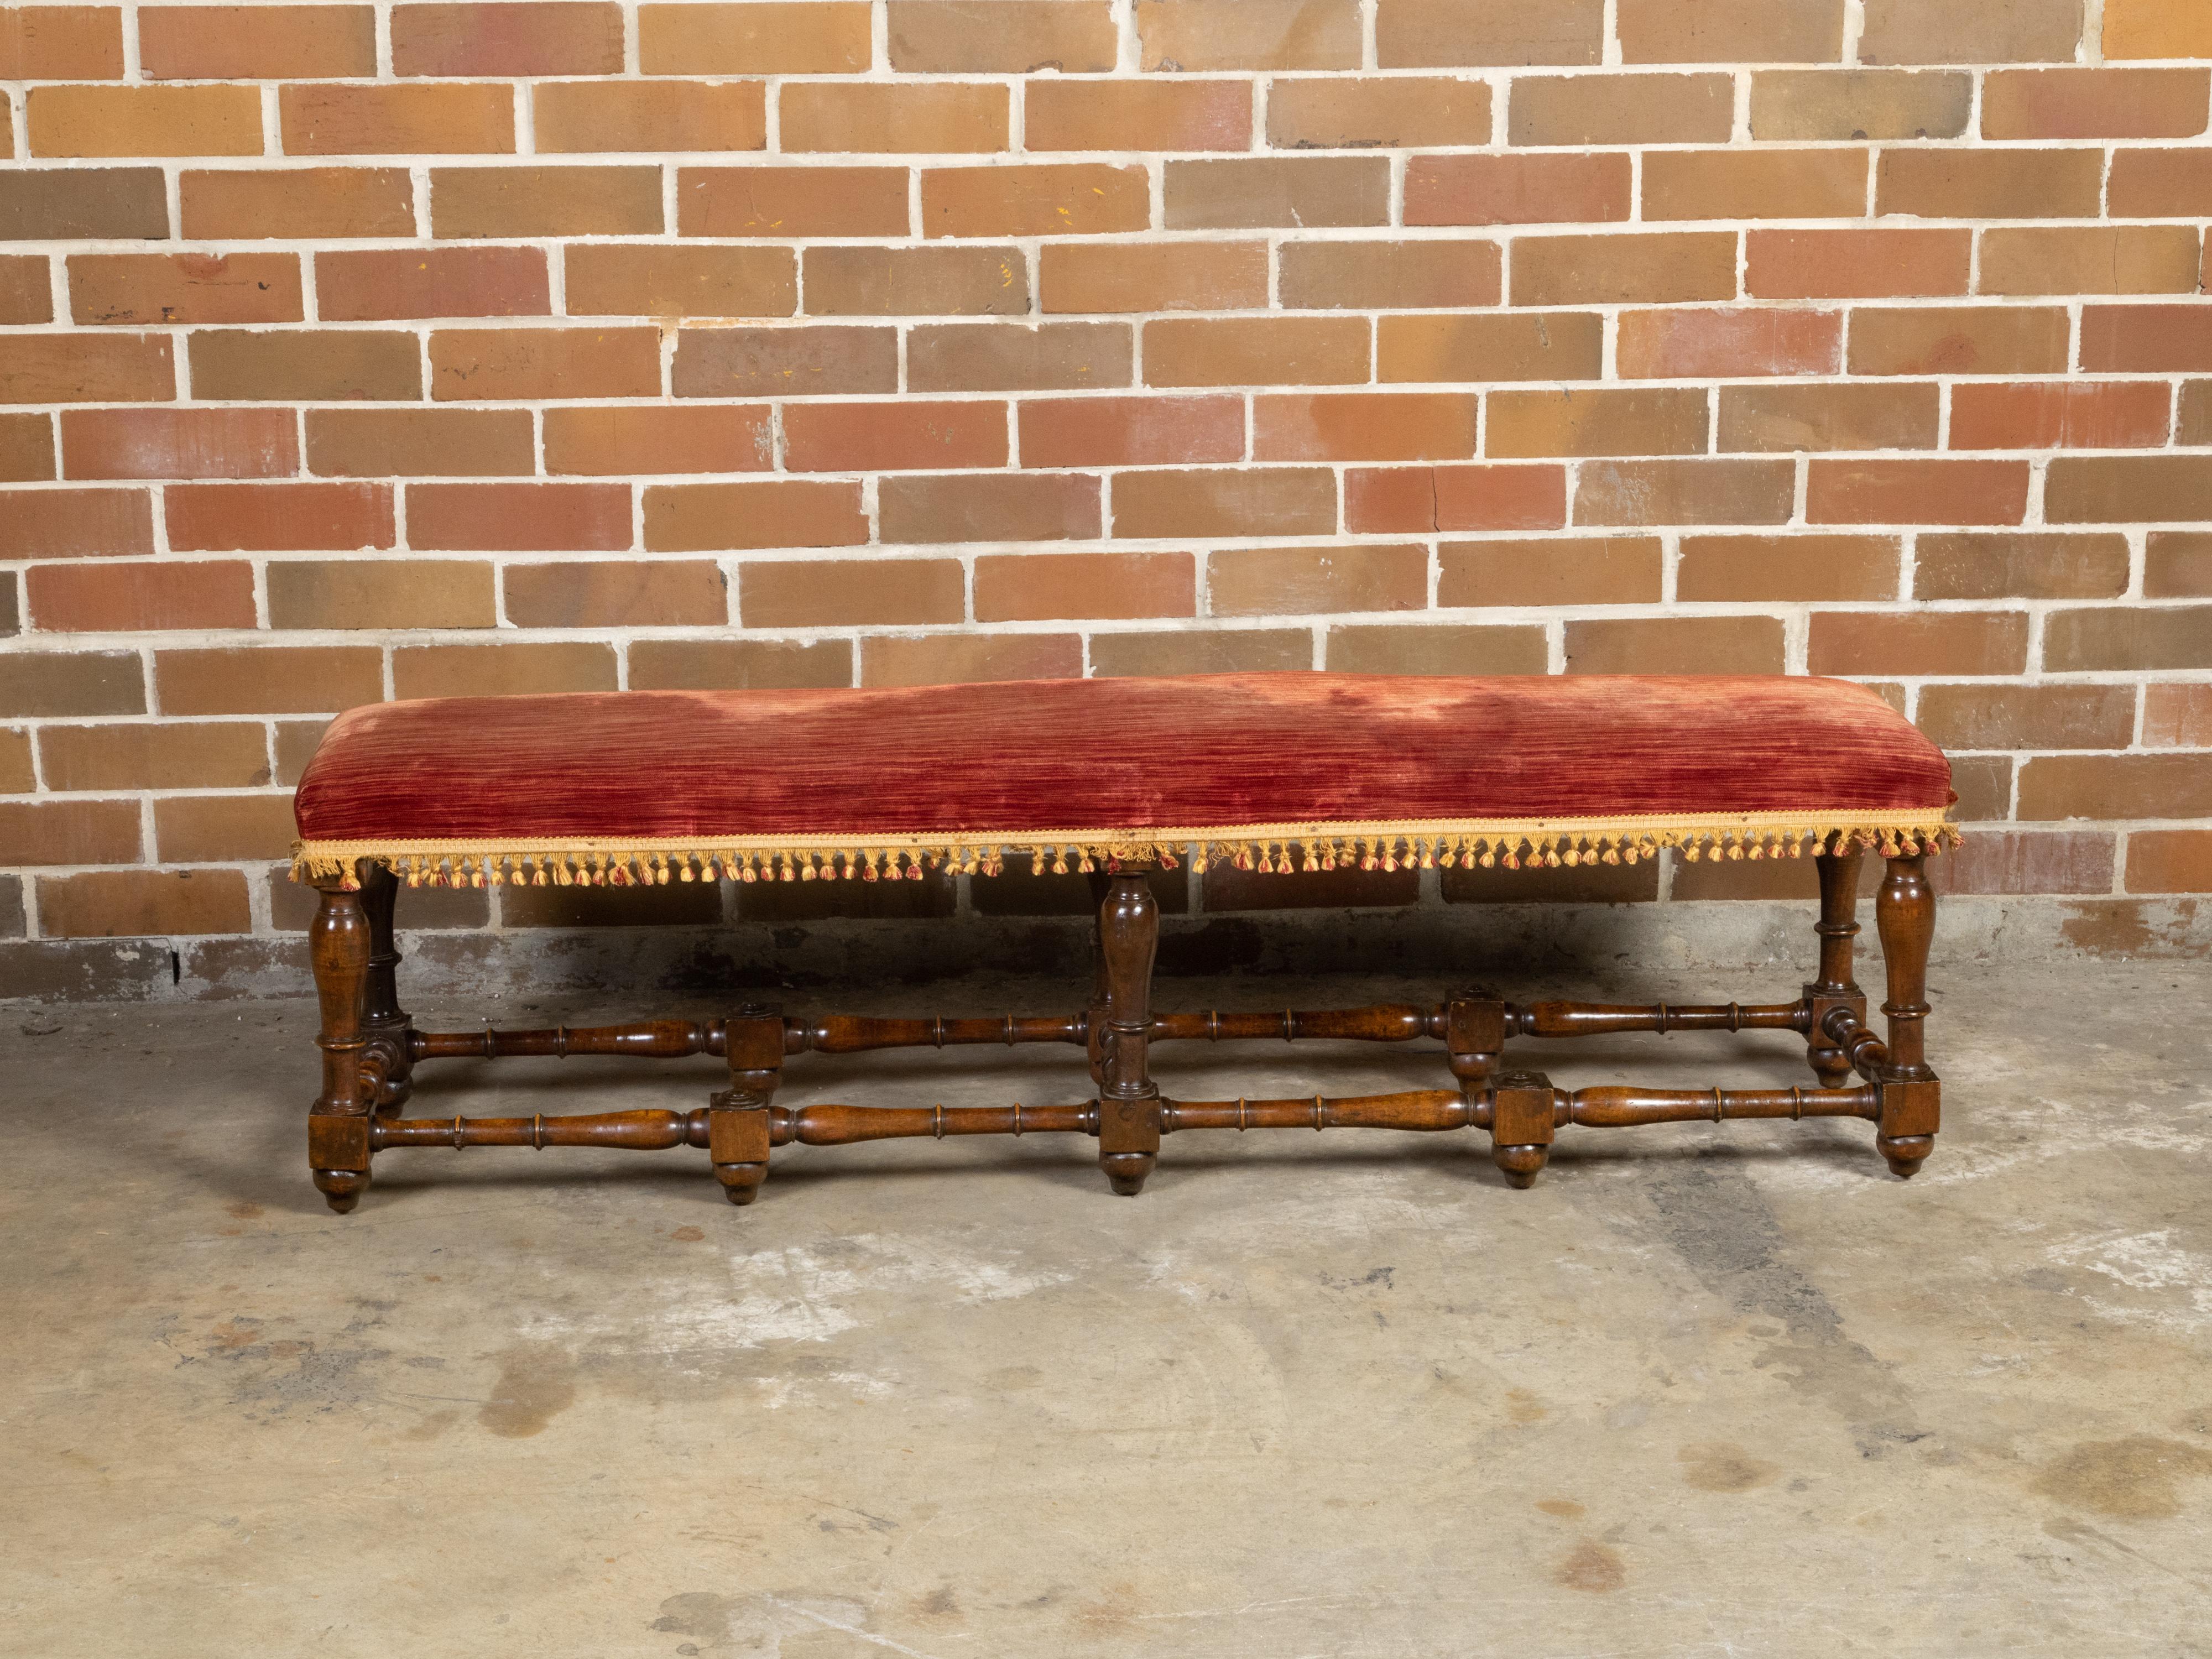 An Italian walnut bench from the early 19th century, with red fabric, petite tassels, turned legs and stretchers. Created in Italy during the first quarter of the 19th century, this walnut bench features a long rectangular seat covered with a red